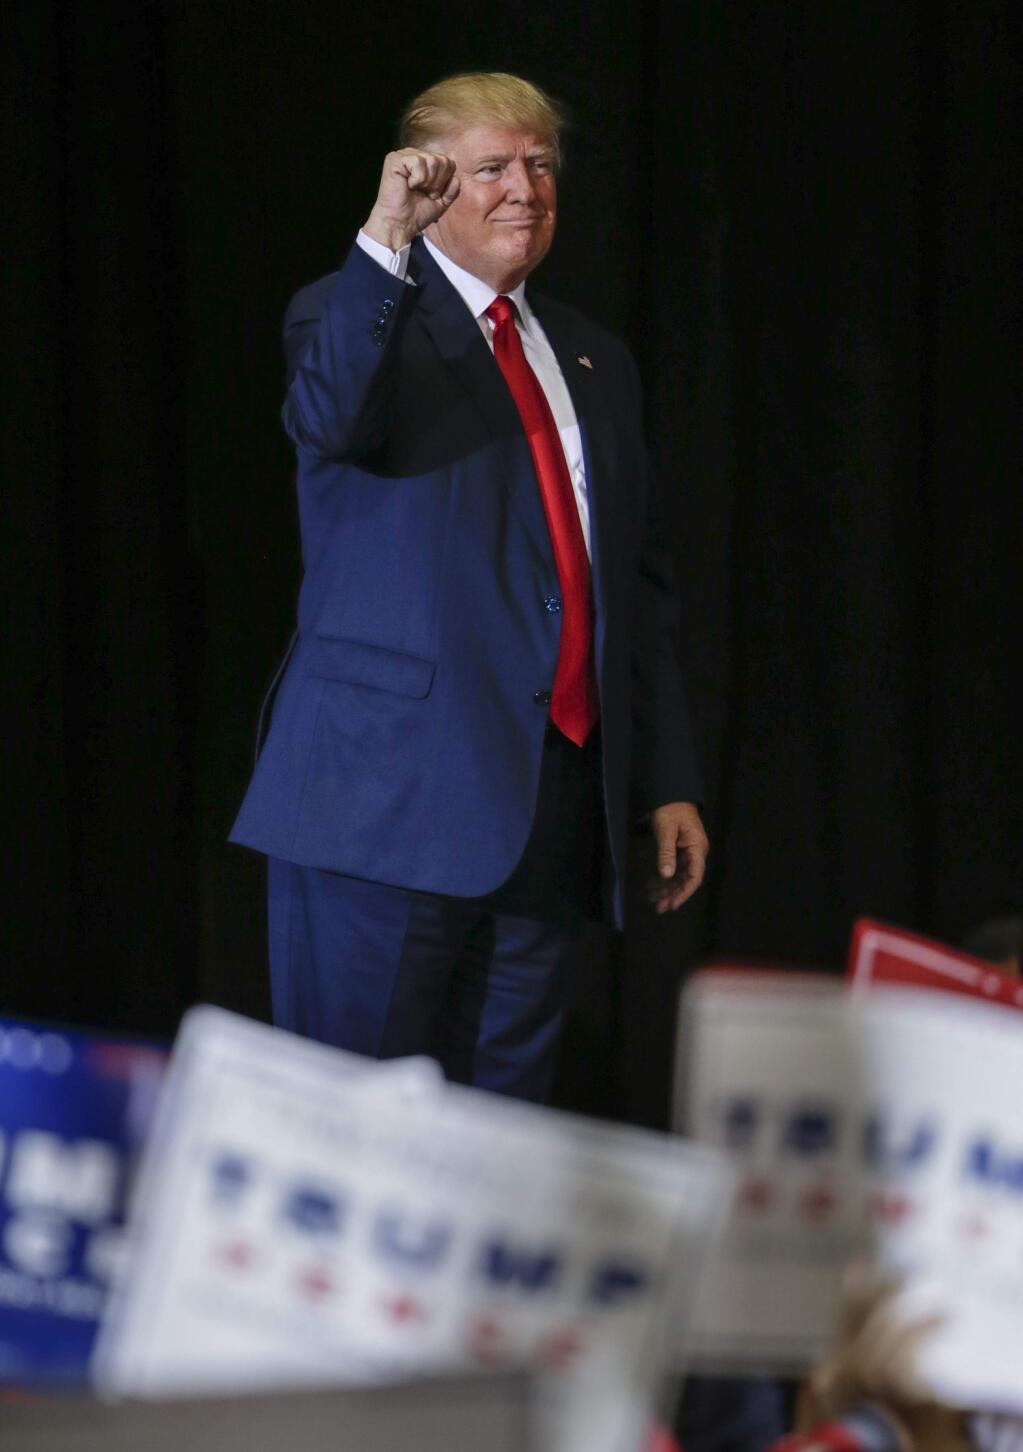 Republican presidential candidate Donald Trump raises his fist after speaks at a campaign rally in Grand Rapids, Mich., Monday, Oct. 31, 2016. (AP Photo/Nati Harnik)